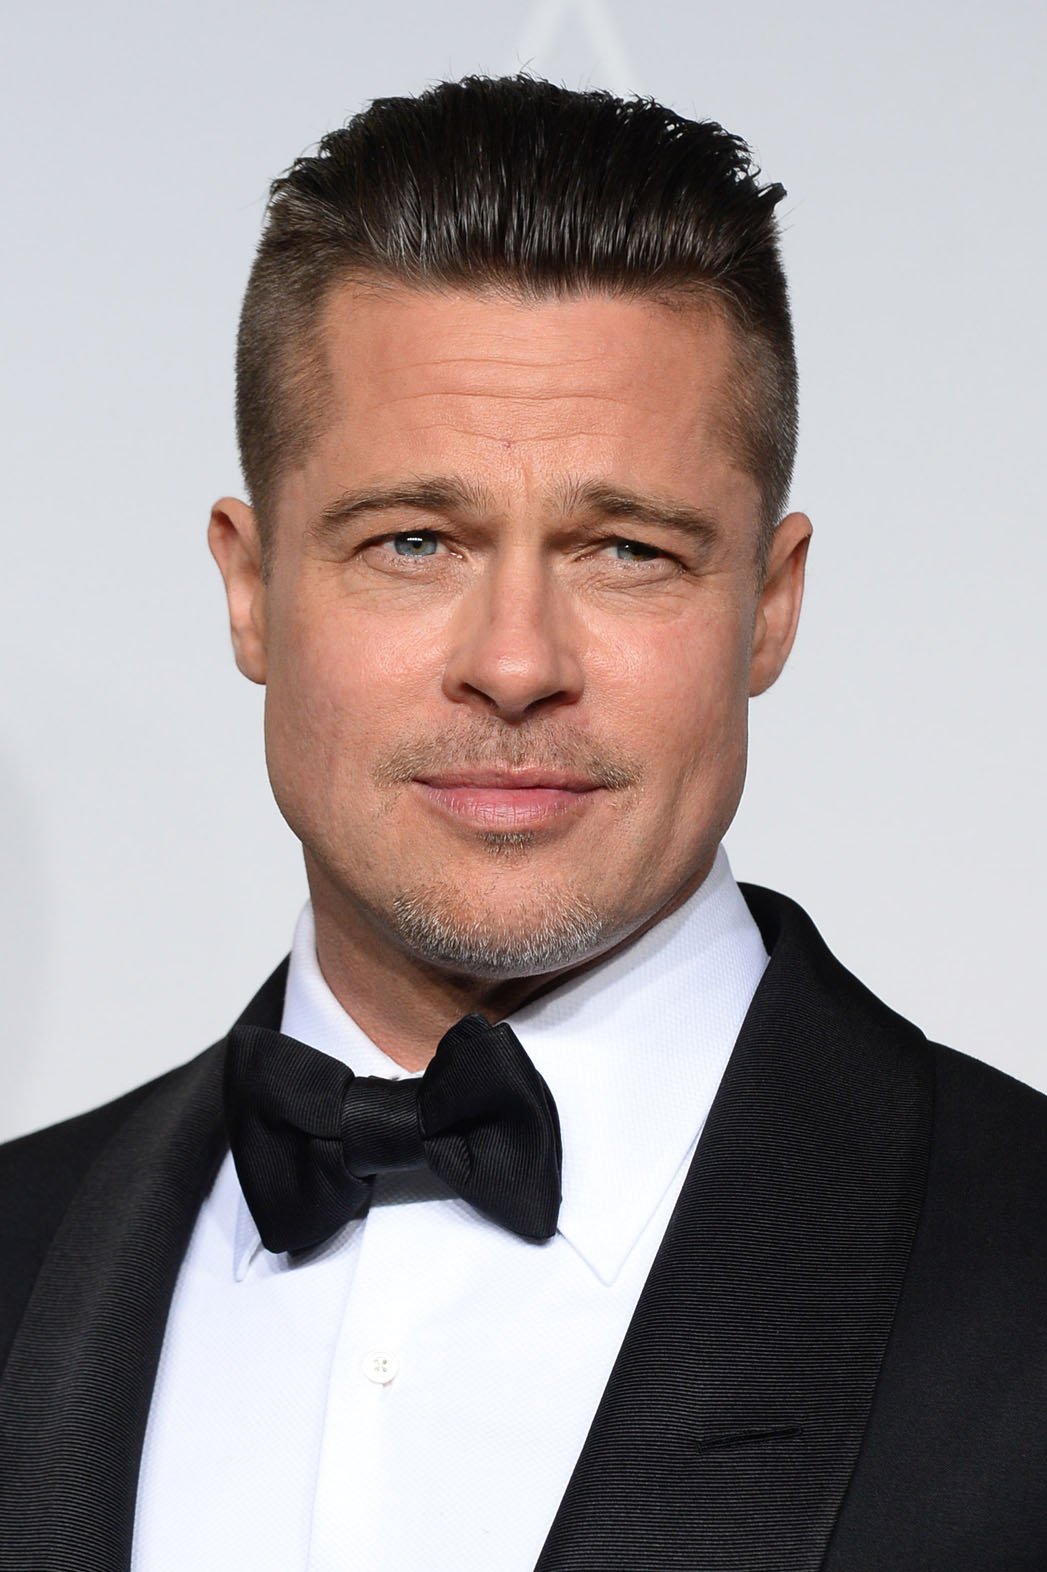 brad pitt with fury move haircut out of character